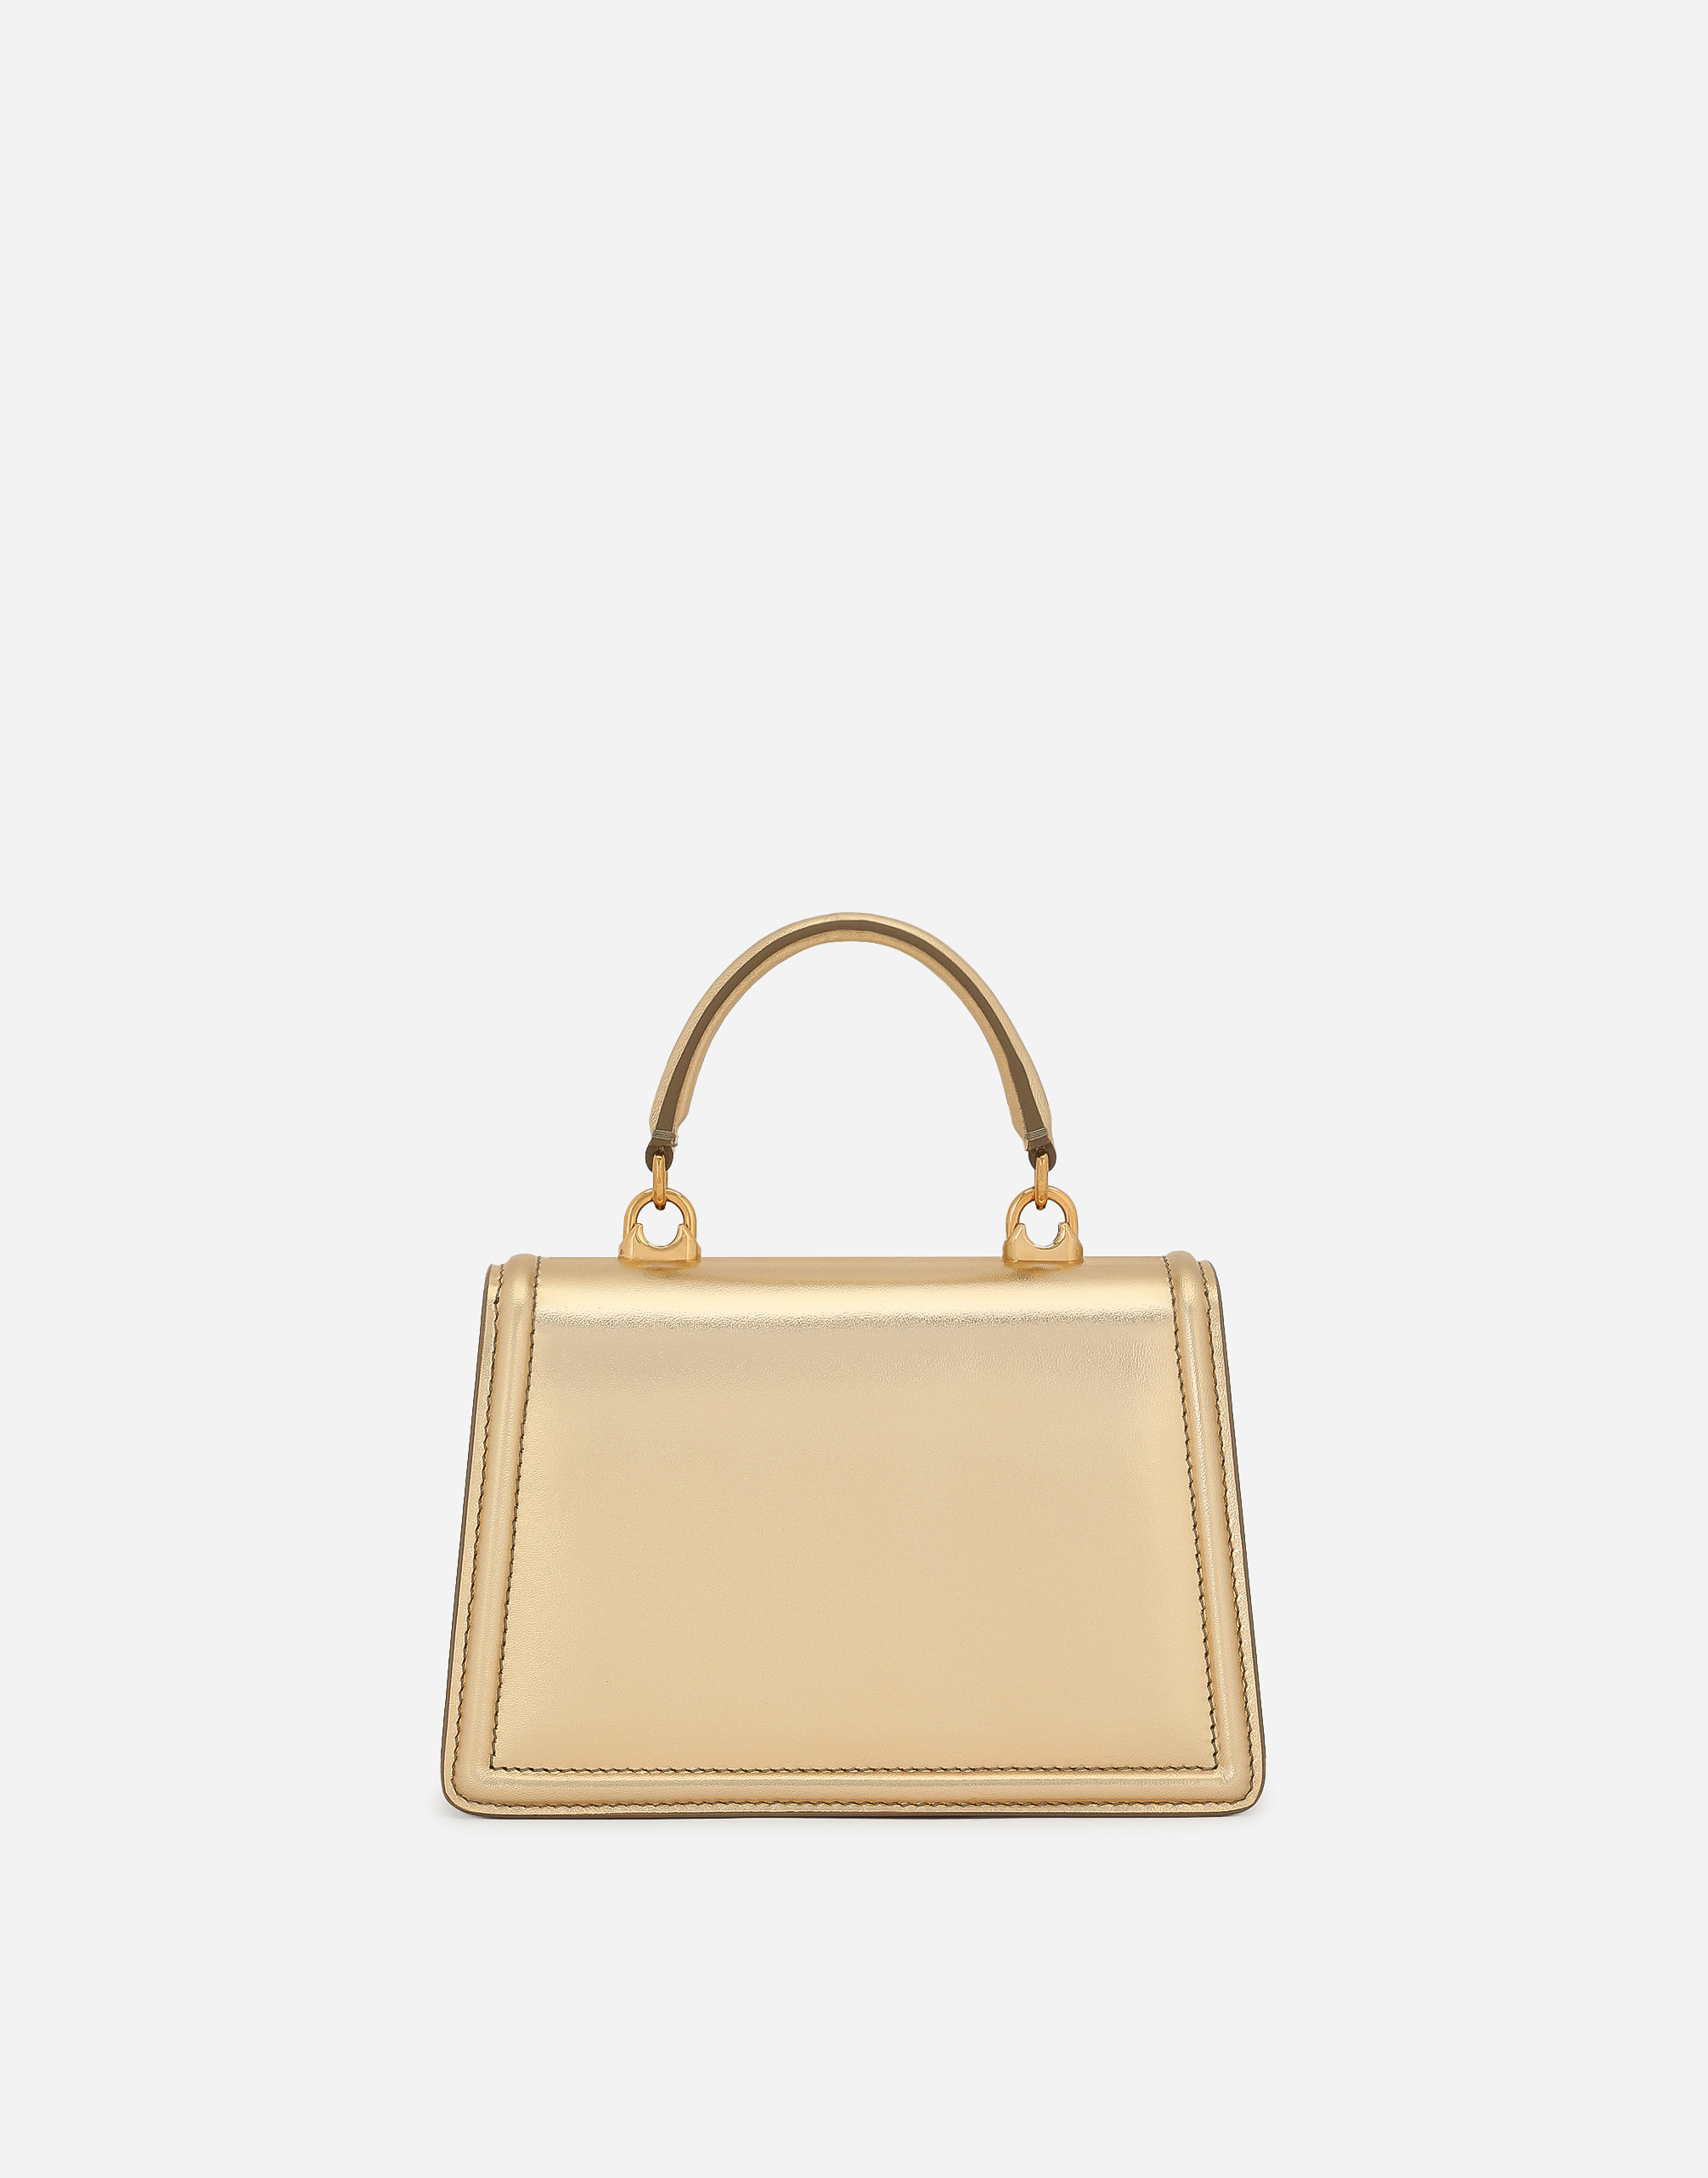 Small Devotion bag in nappa mordore leather in Gold for 